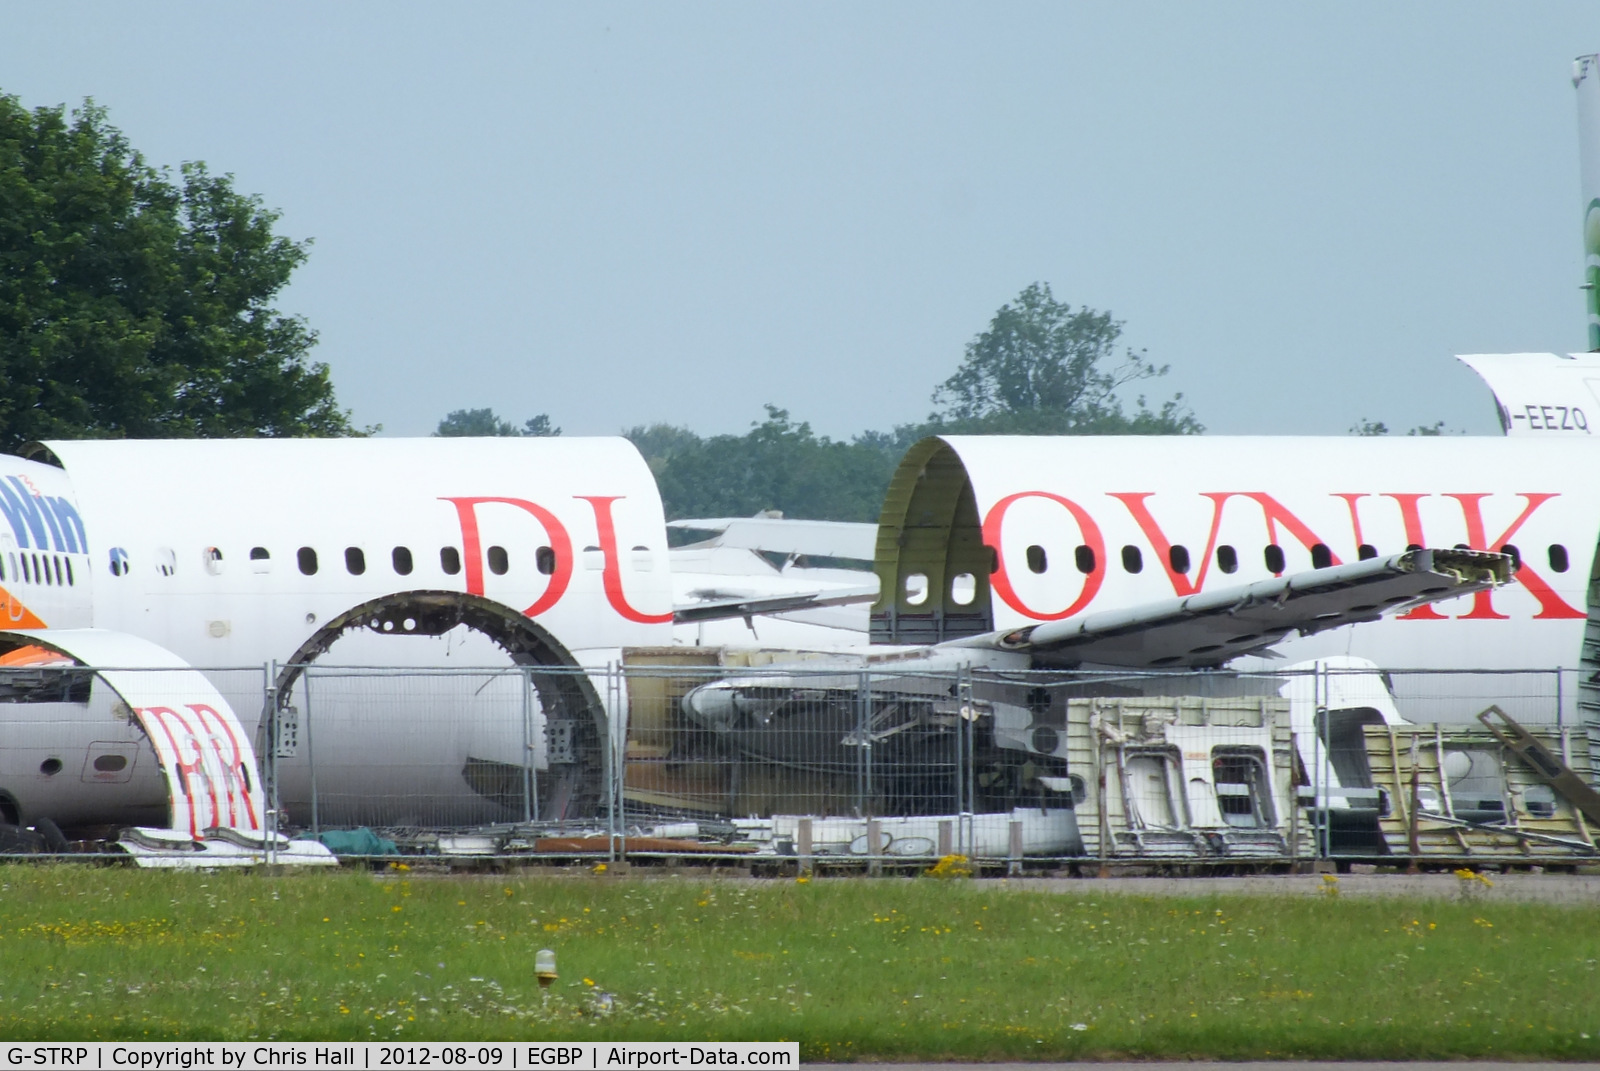 G-STRP, 1990 Airbus A320-211 C/N 136, remains of Dubrovnik Airline A320 in the scrapping area at Kemble